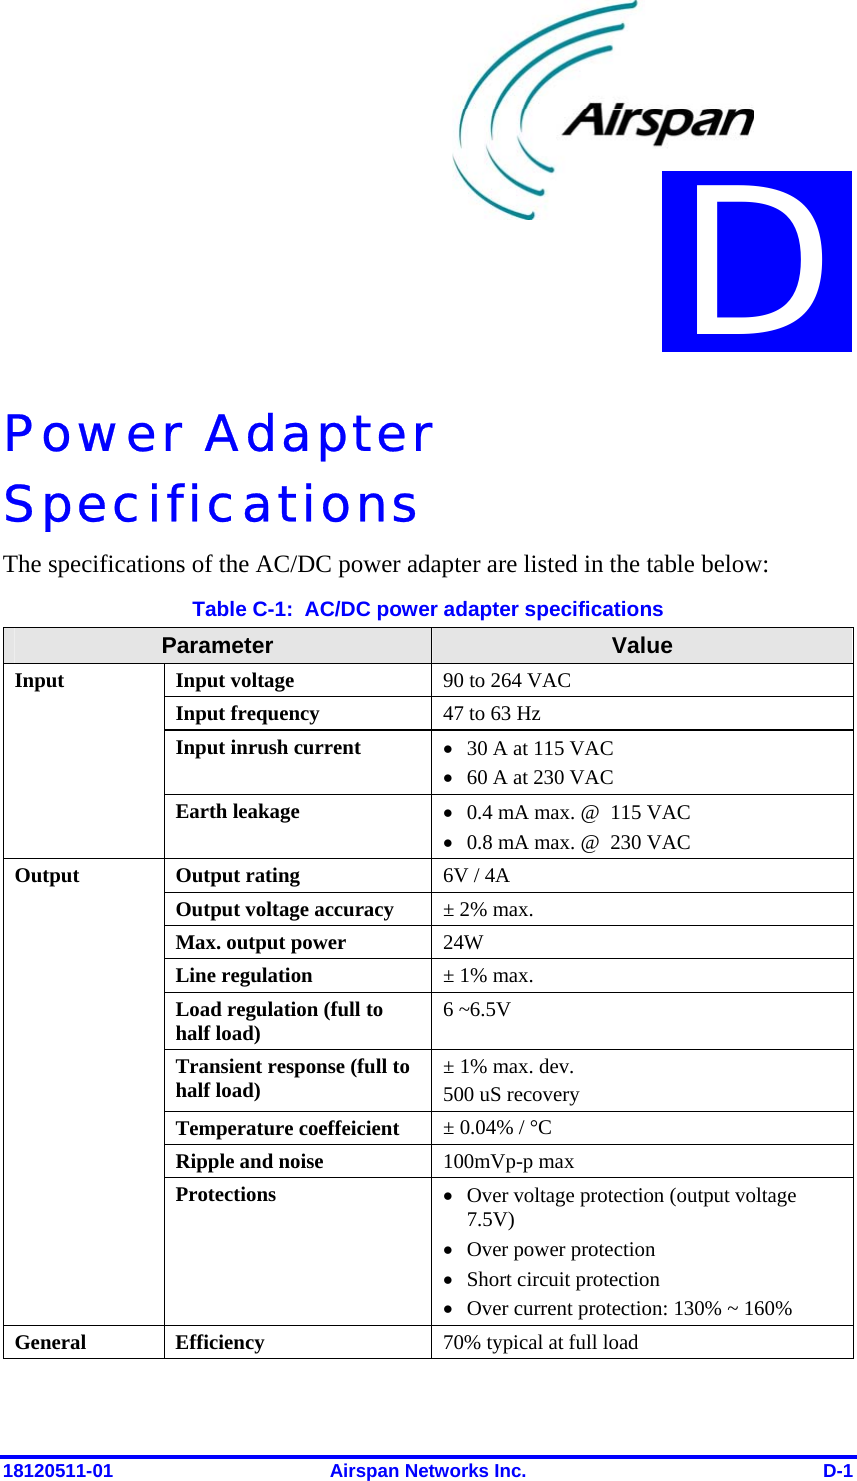  18120511-01  Airspan Networks Inc.  D-1 Power Adapter Specifications The specifications of the AC/DC power adapter are listed in the table below: Table C-1:  AC/DC power adapter specifications Parameter  Value Input voltage  90 to 264 VAC Input frequency  47 to 63 Hz Input inrush current  • 30 A at 115 VAC • 60 A at 230 VAC Input Earth leakage  • 0.4 mA max. @  115 VAC • 0.8 mA max. @  230 VAC Output rating  6V / 4A Output voltage accuracy  ± 2% max. Max. output power  24W Line regulation  ± 1% max. Load regulation (full to half load)  6 ~6.5V  Transient response (full to half load)  ± 1% max. dev. 500 uS recovery Temperature coeffeicient  ± 0.04% / °C Ripple and noise  100mVp-p max Output Protections  • Over voltage protection (output voltage 7.5V)  • Over power protection  • Short circuit protection  • Over current protection: 130% ~ 160% General   Efficiency  70% typical at full load D 